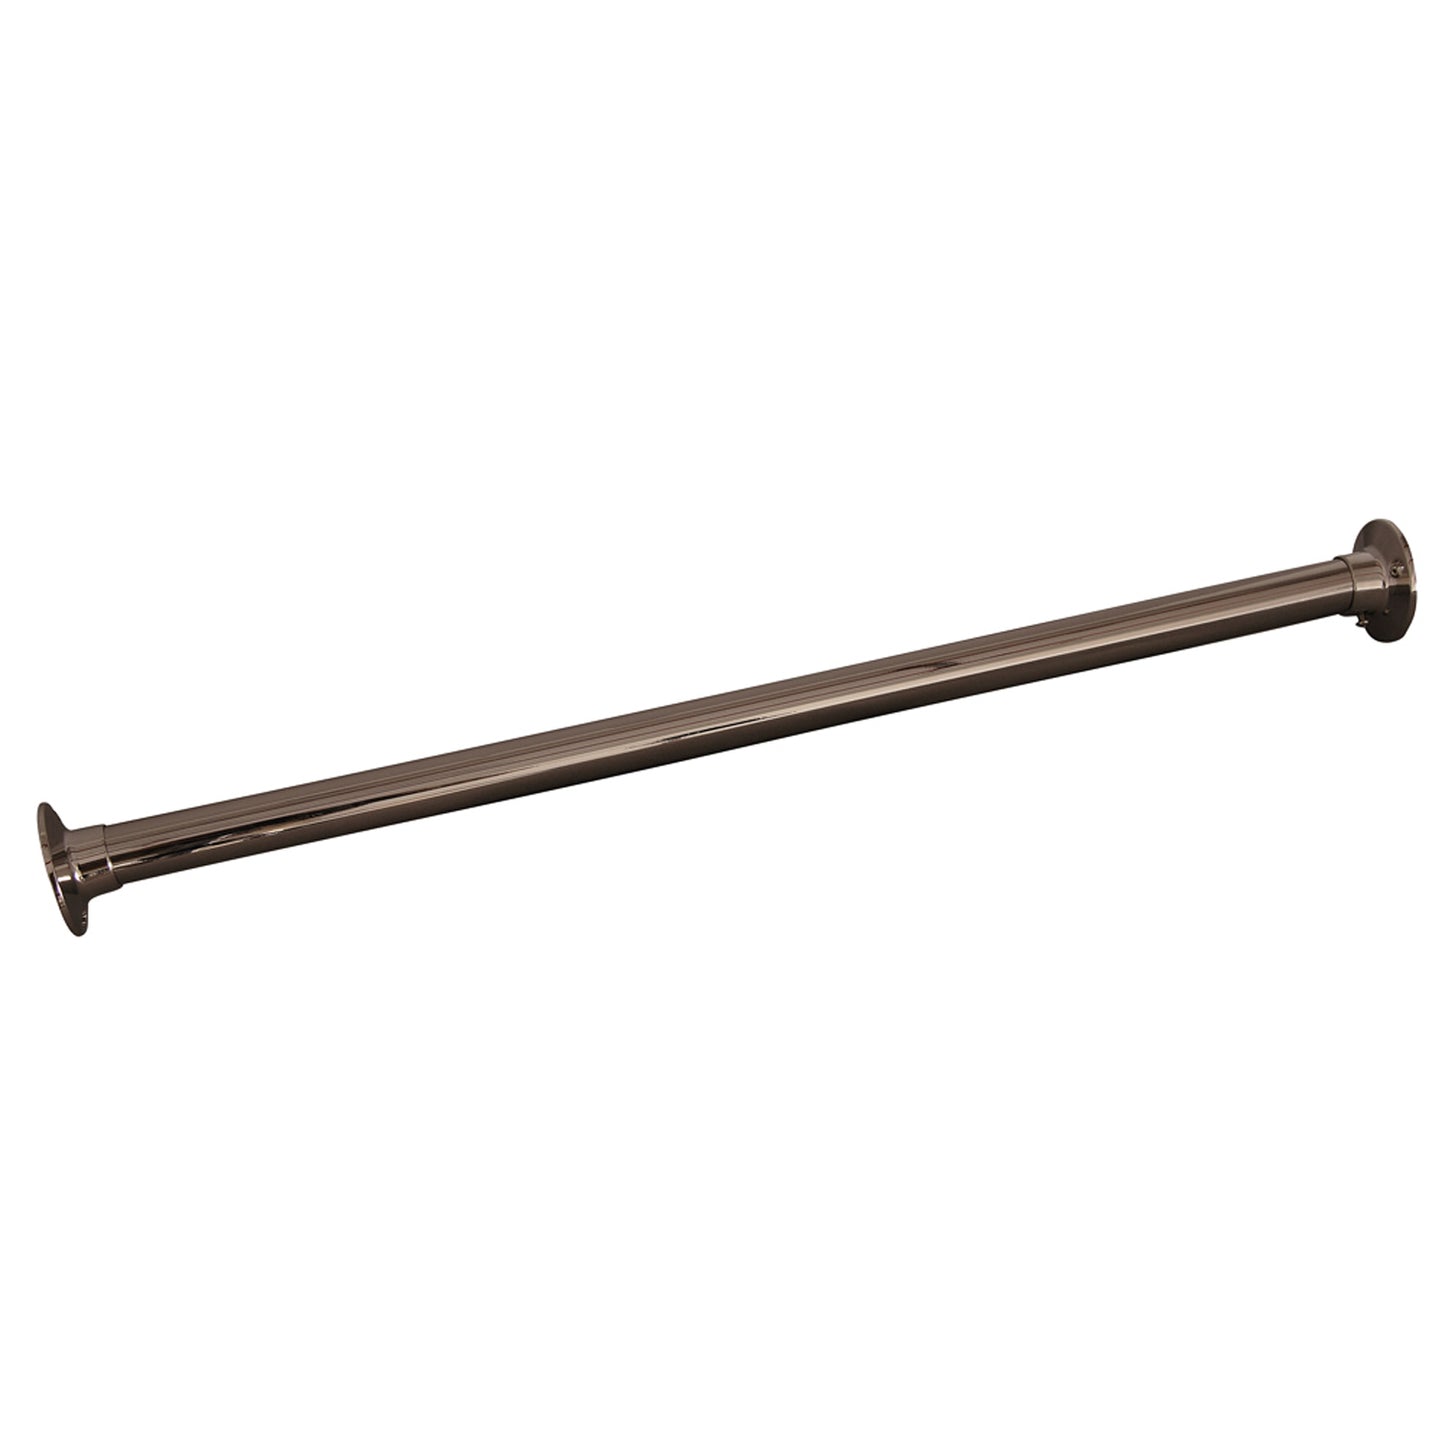 48" Straight Shower Rod in Polished Nickel